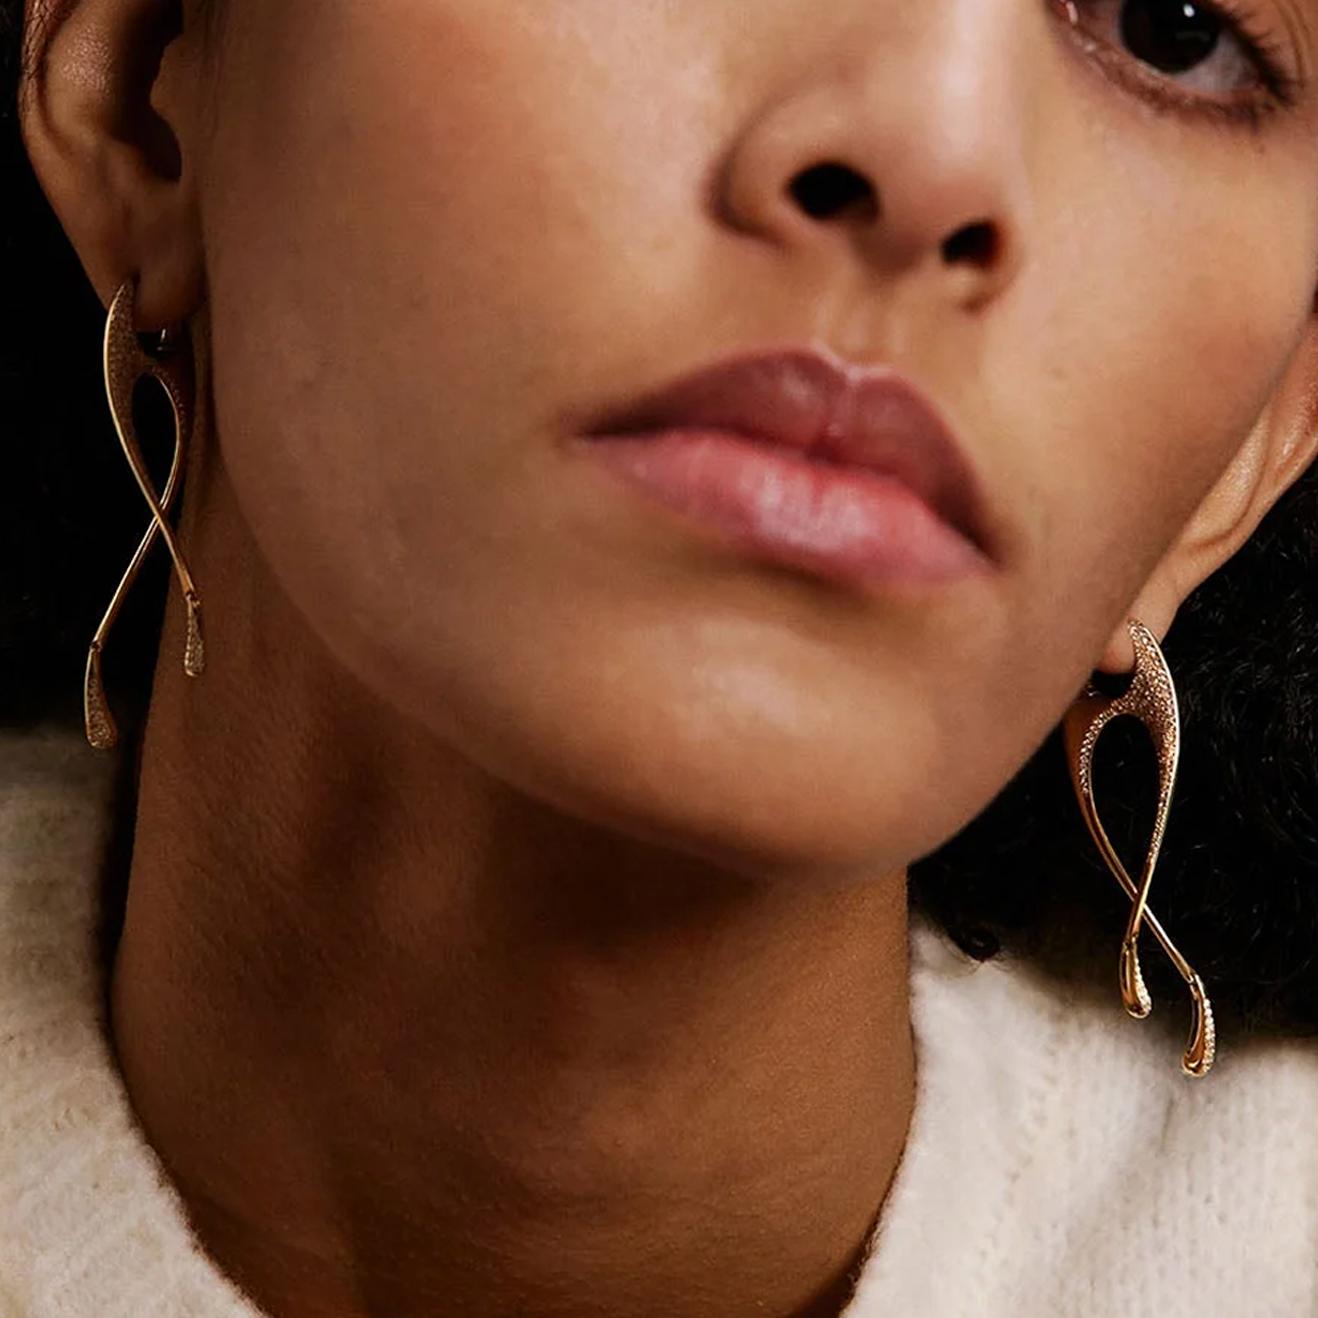 Kloto's Esse earrings are crafted from 18k yellow gold and feature 1.27ct pavé set fine white diamonds, which highlight the curved lines of these fluid earrings.

Kloto's designer Senem Gençoğlu, combines her 40-year family heritage of jewellery